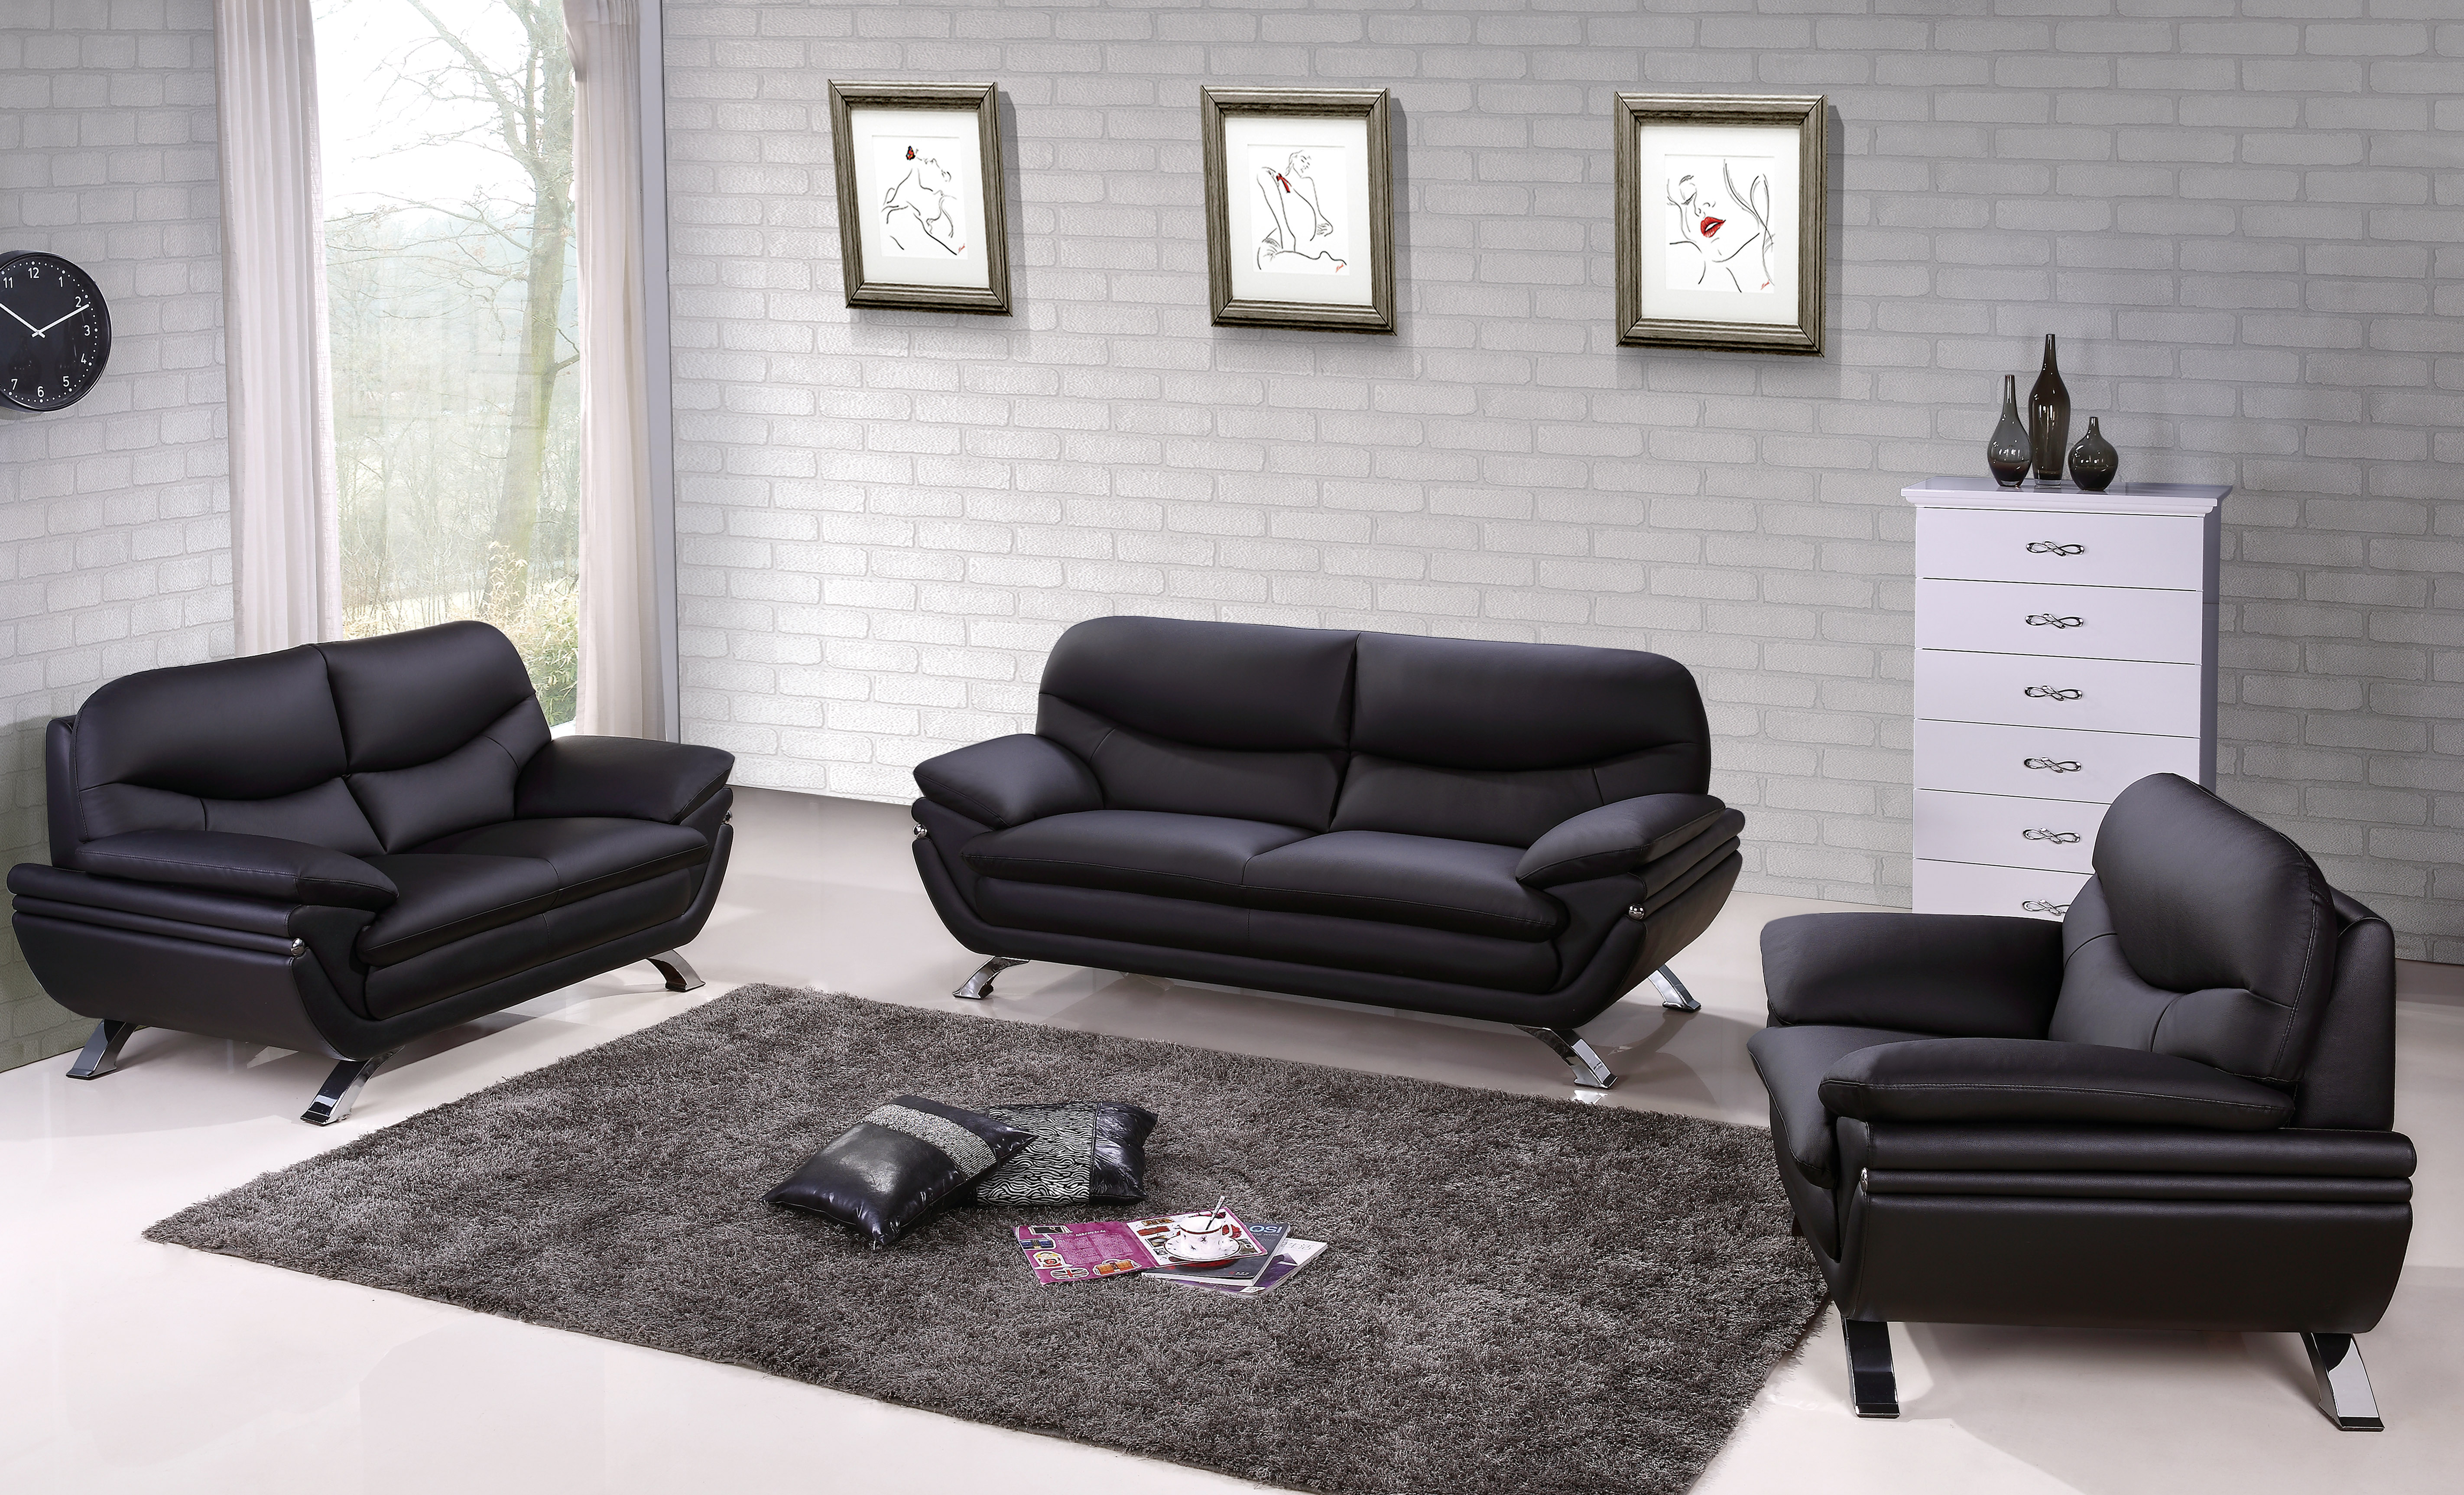 Harmony Ying Yang Contemporary Leather Living Room Sofa Set Memphis ...